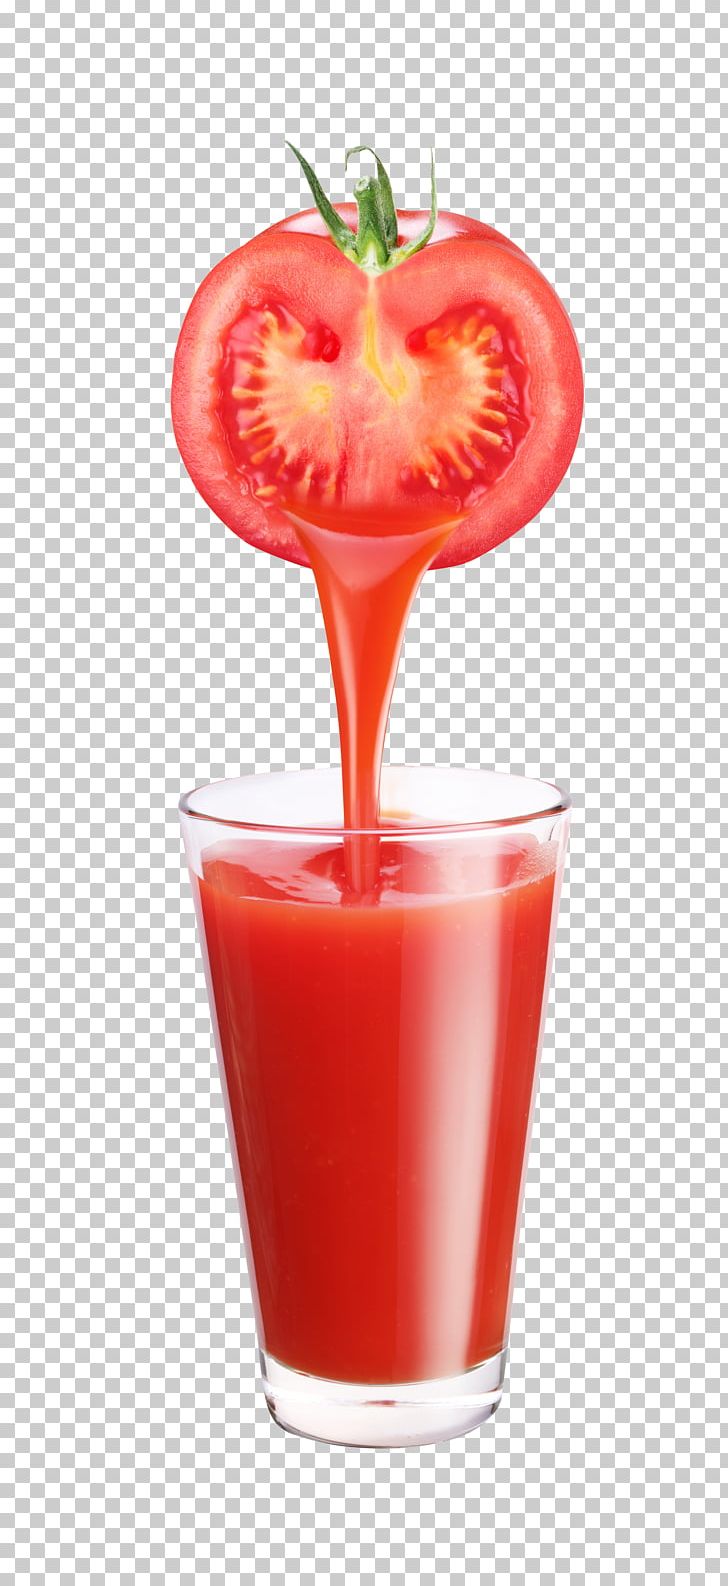 Juice Nutrient Eating Juicing Donation PNG, Clipart, Blood, Detoxification, Drink, Food, Fruit Free PNG Download